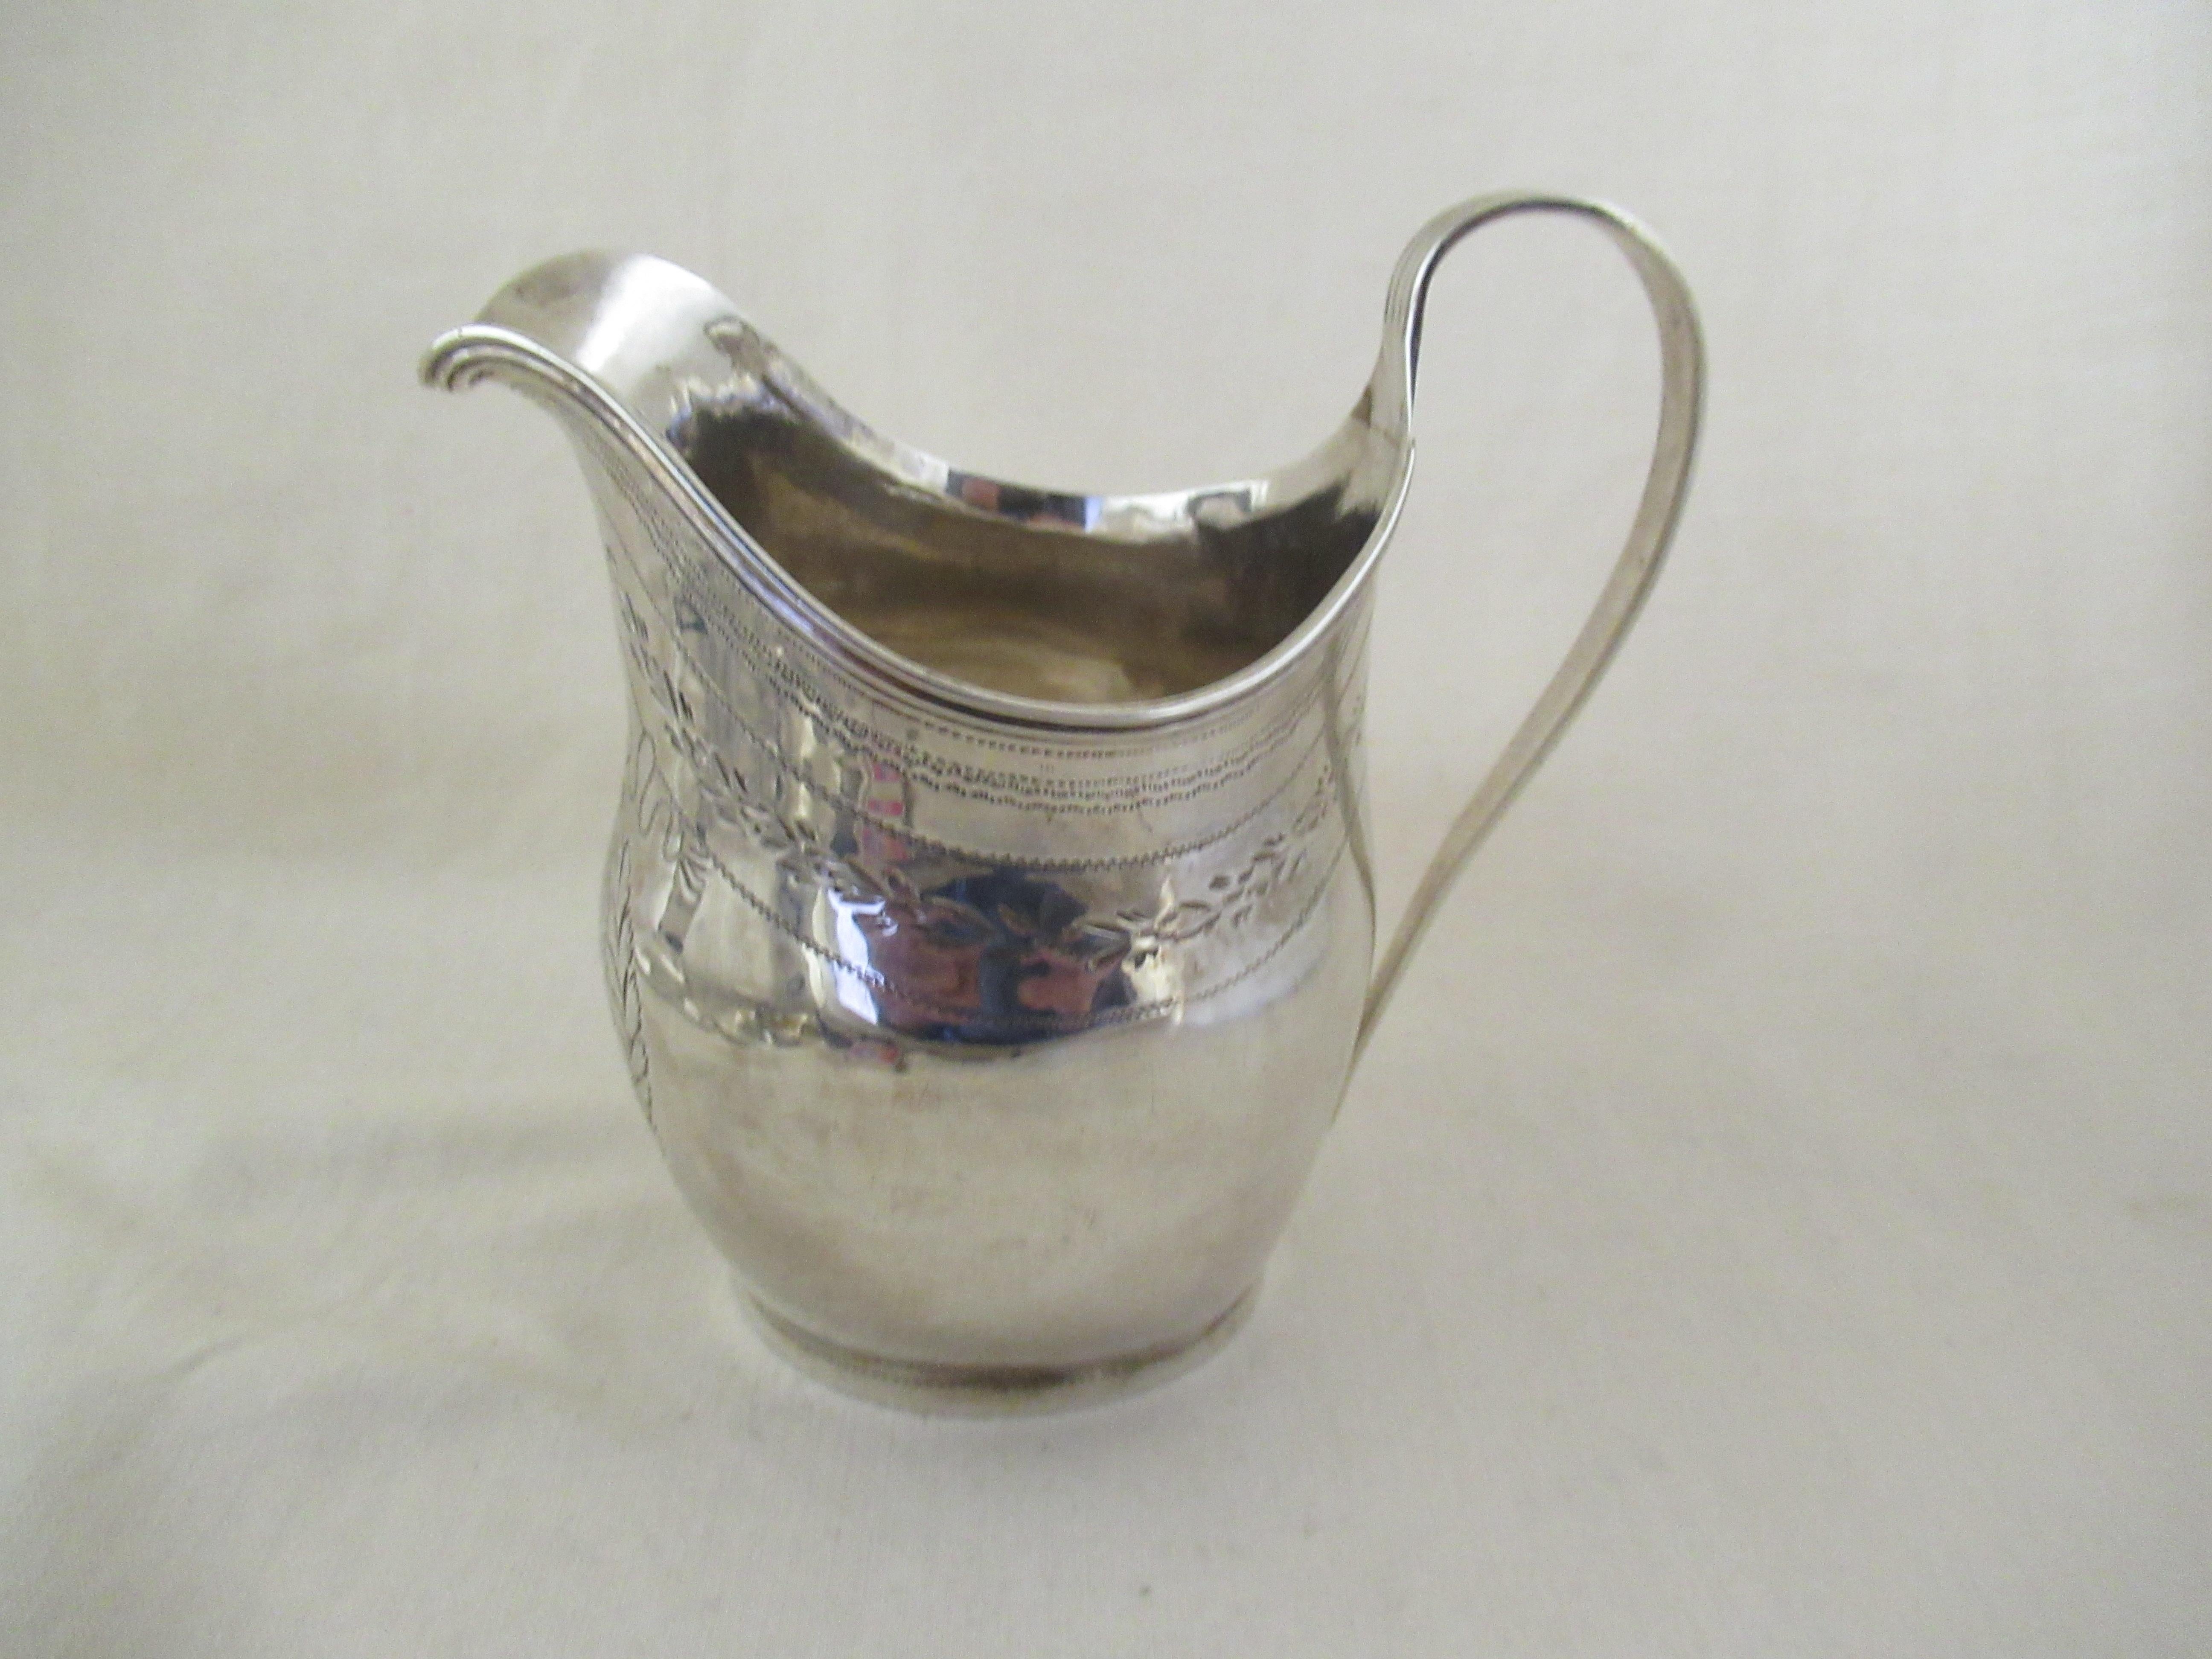 English Solid Sterling Silver  HELMET SHAPED CREAM JUG
Hallmarked for London 1800 with the maker`s mark - W V, for William Vincent.
----------------
A superb, helmet shaped cream jug.
Multi reeded 